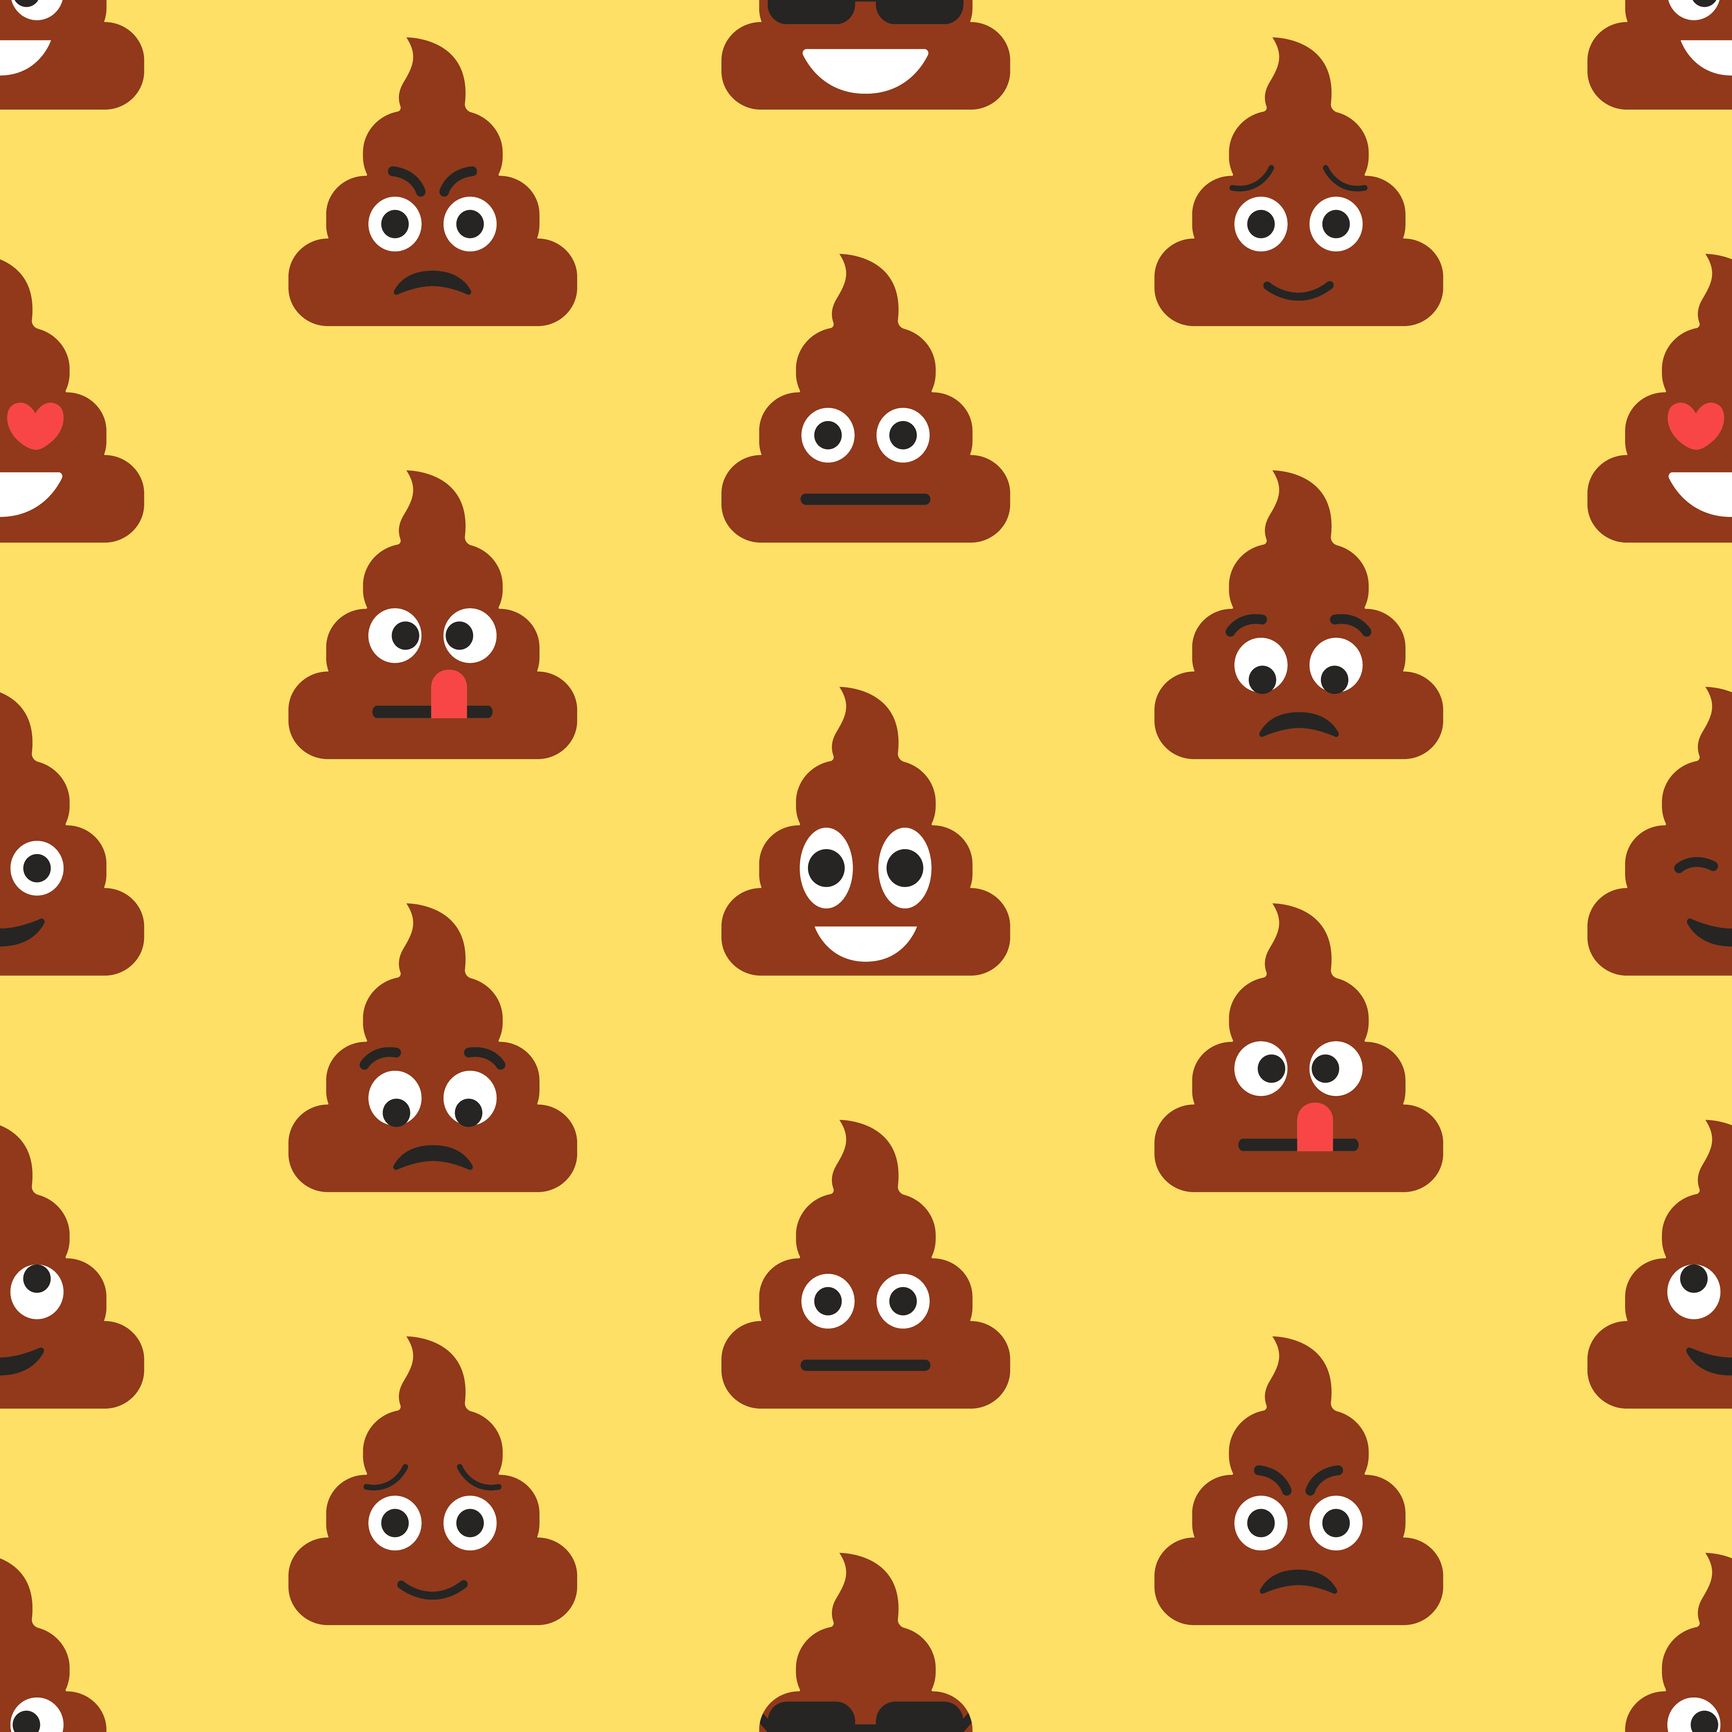 Why Does It Hurt When I Poop? 11 Common Causes and What to Do